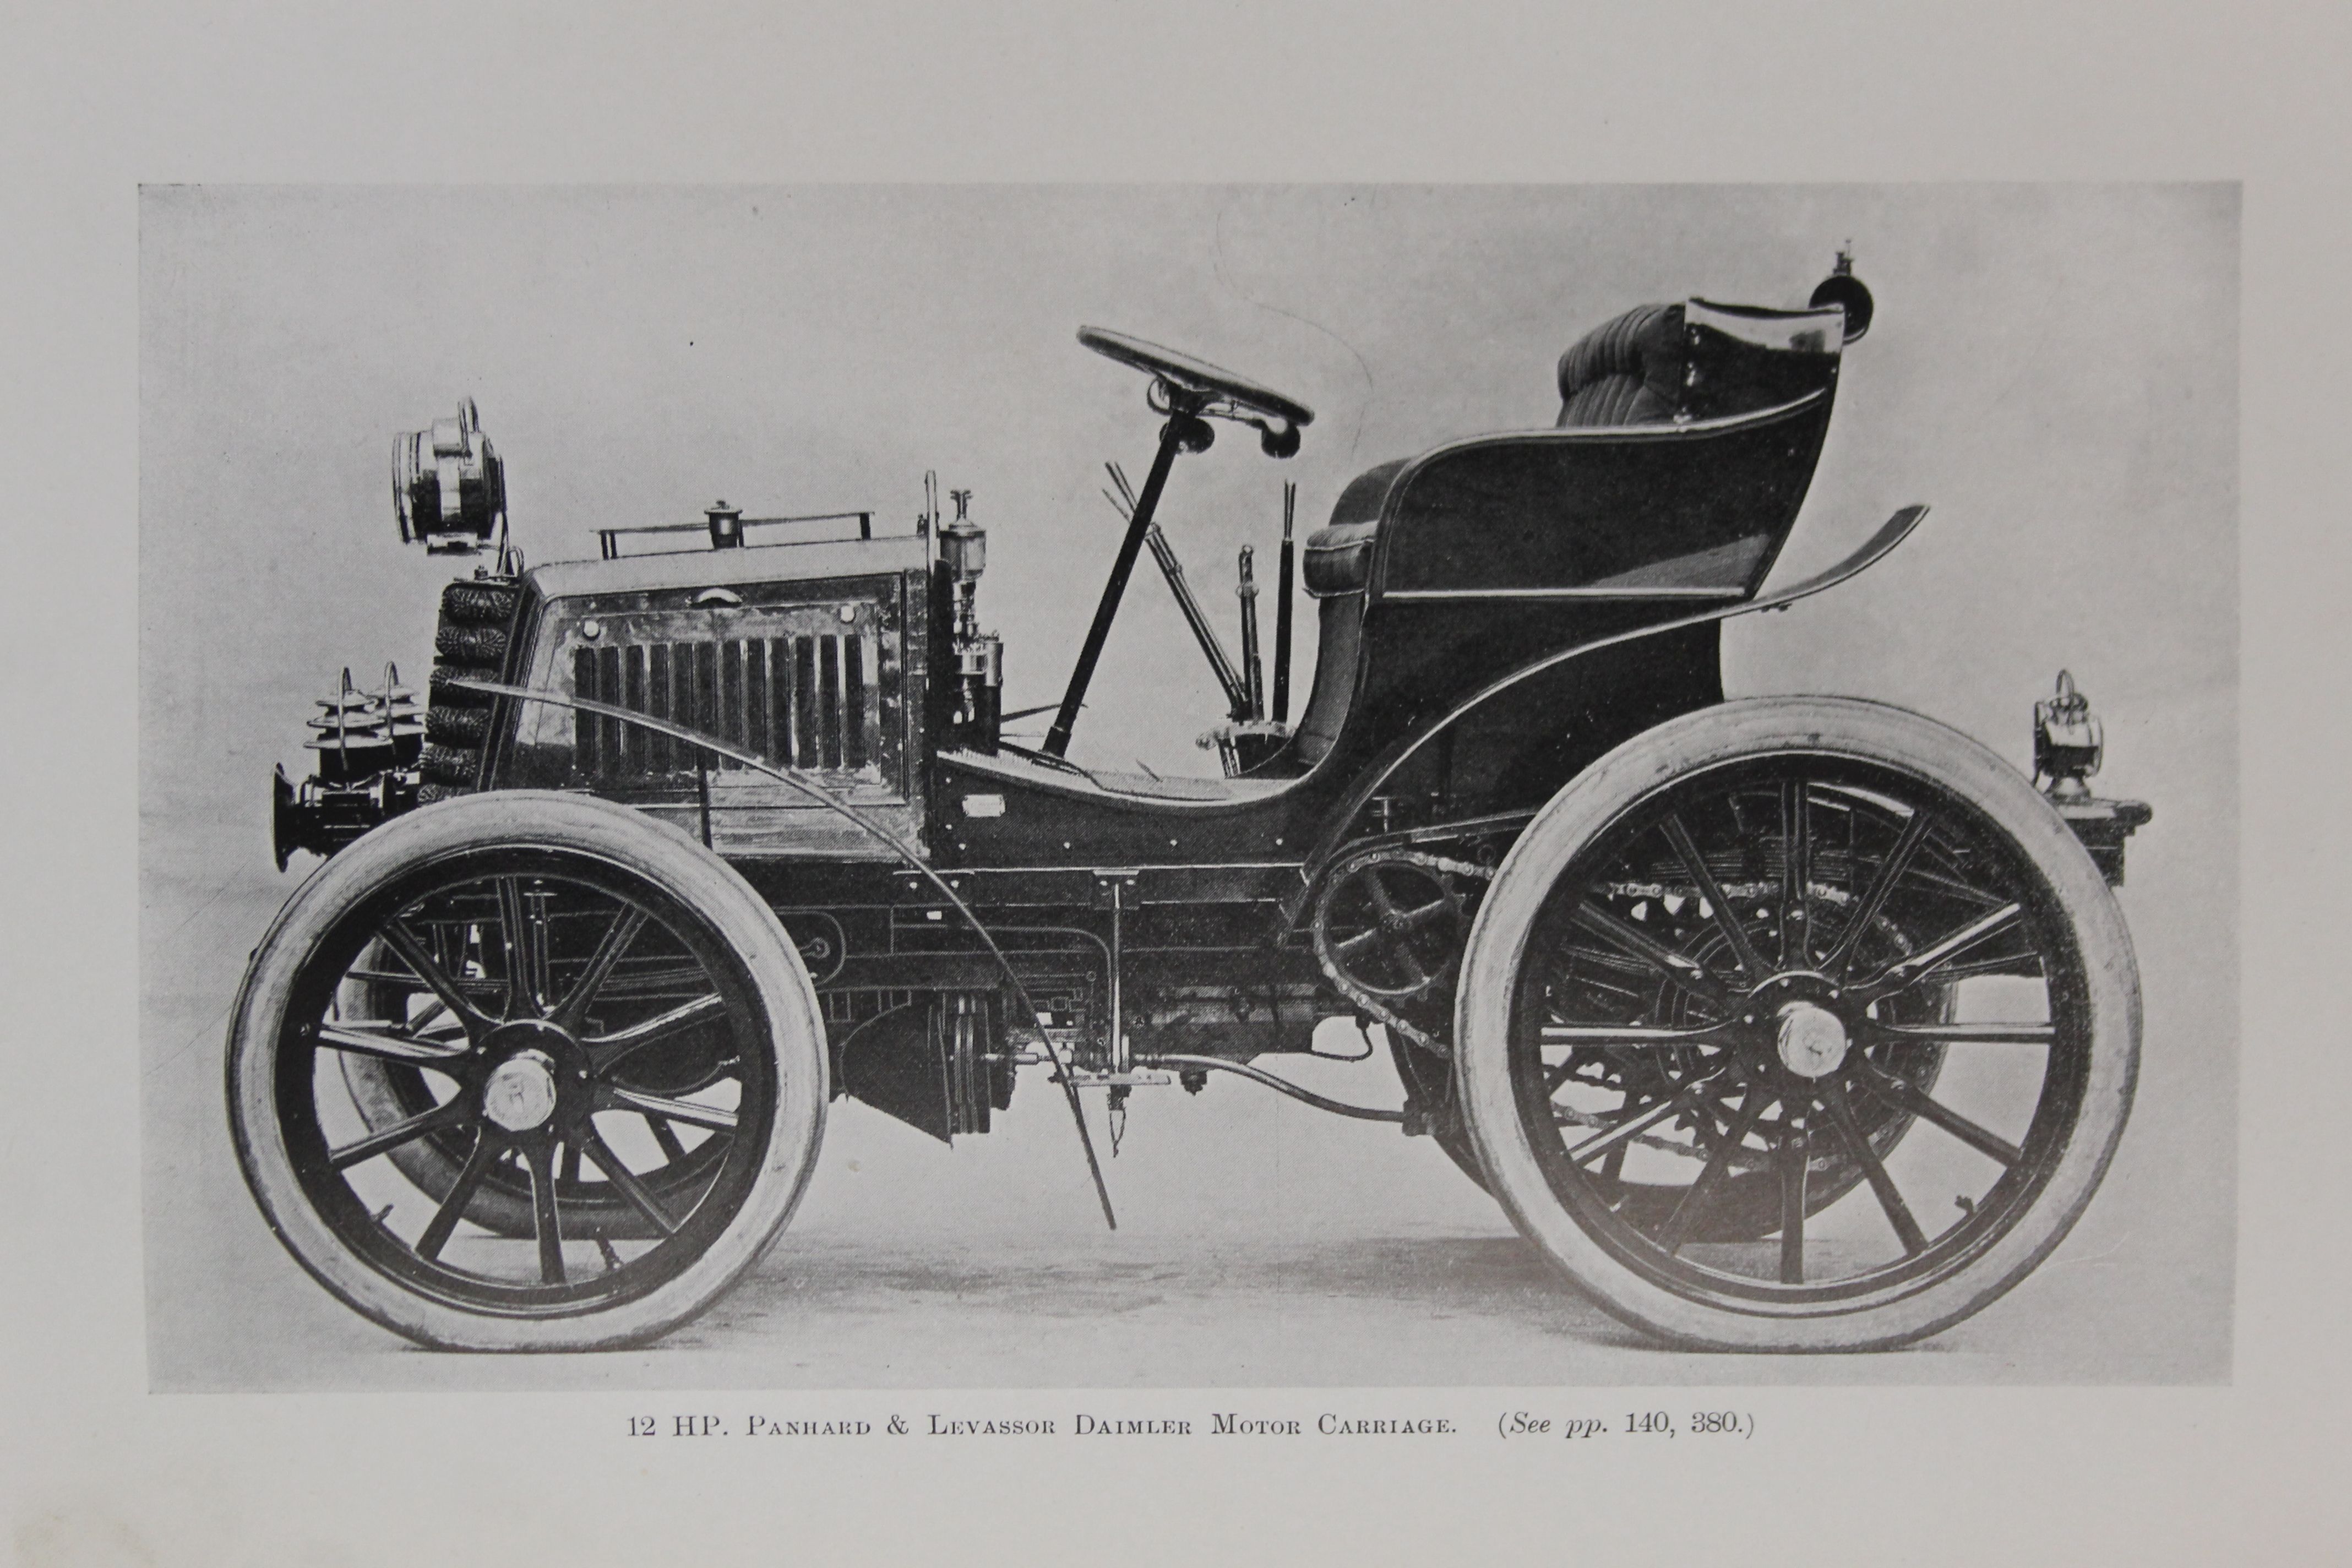 Beaumont (W Worby), Motor Vehicles and Motors, Their Design, Construction and Working by Steam, - Image 7 of 10